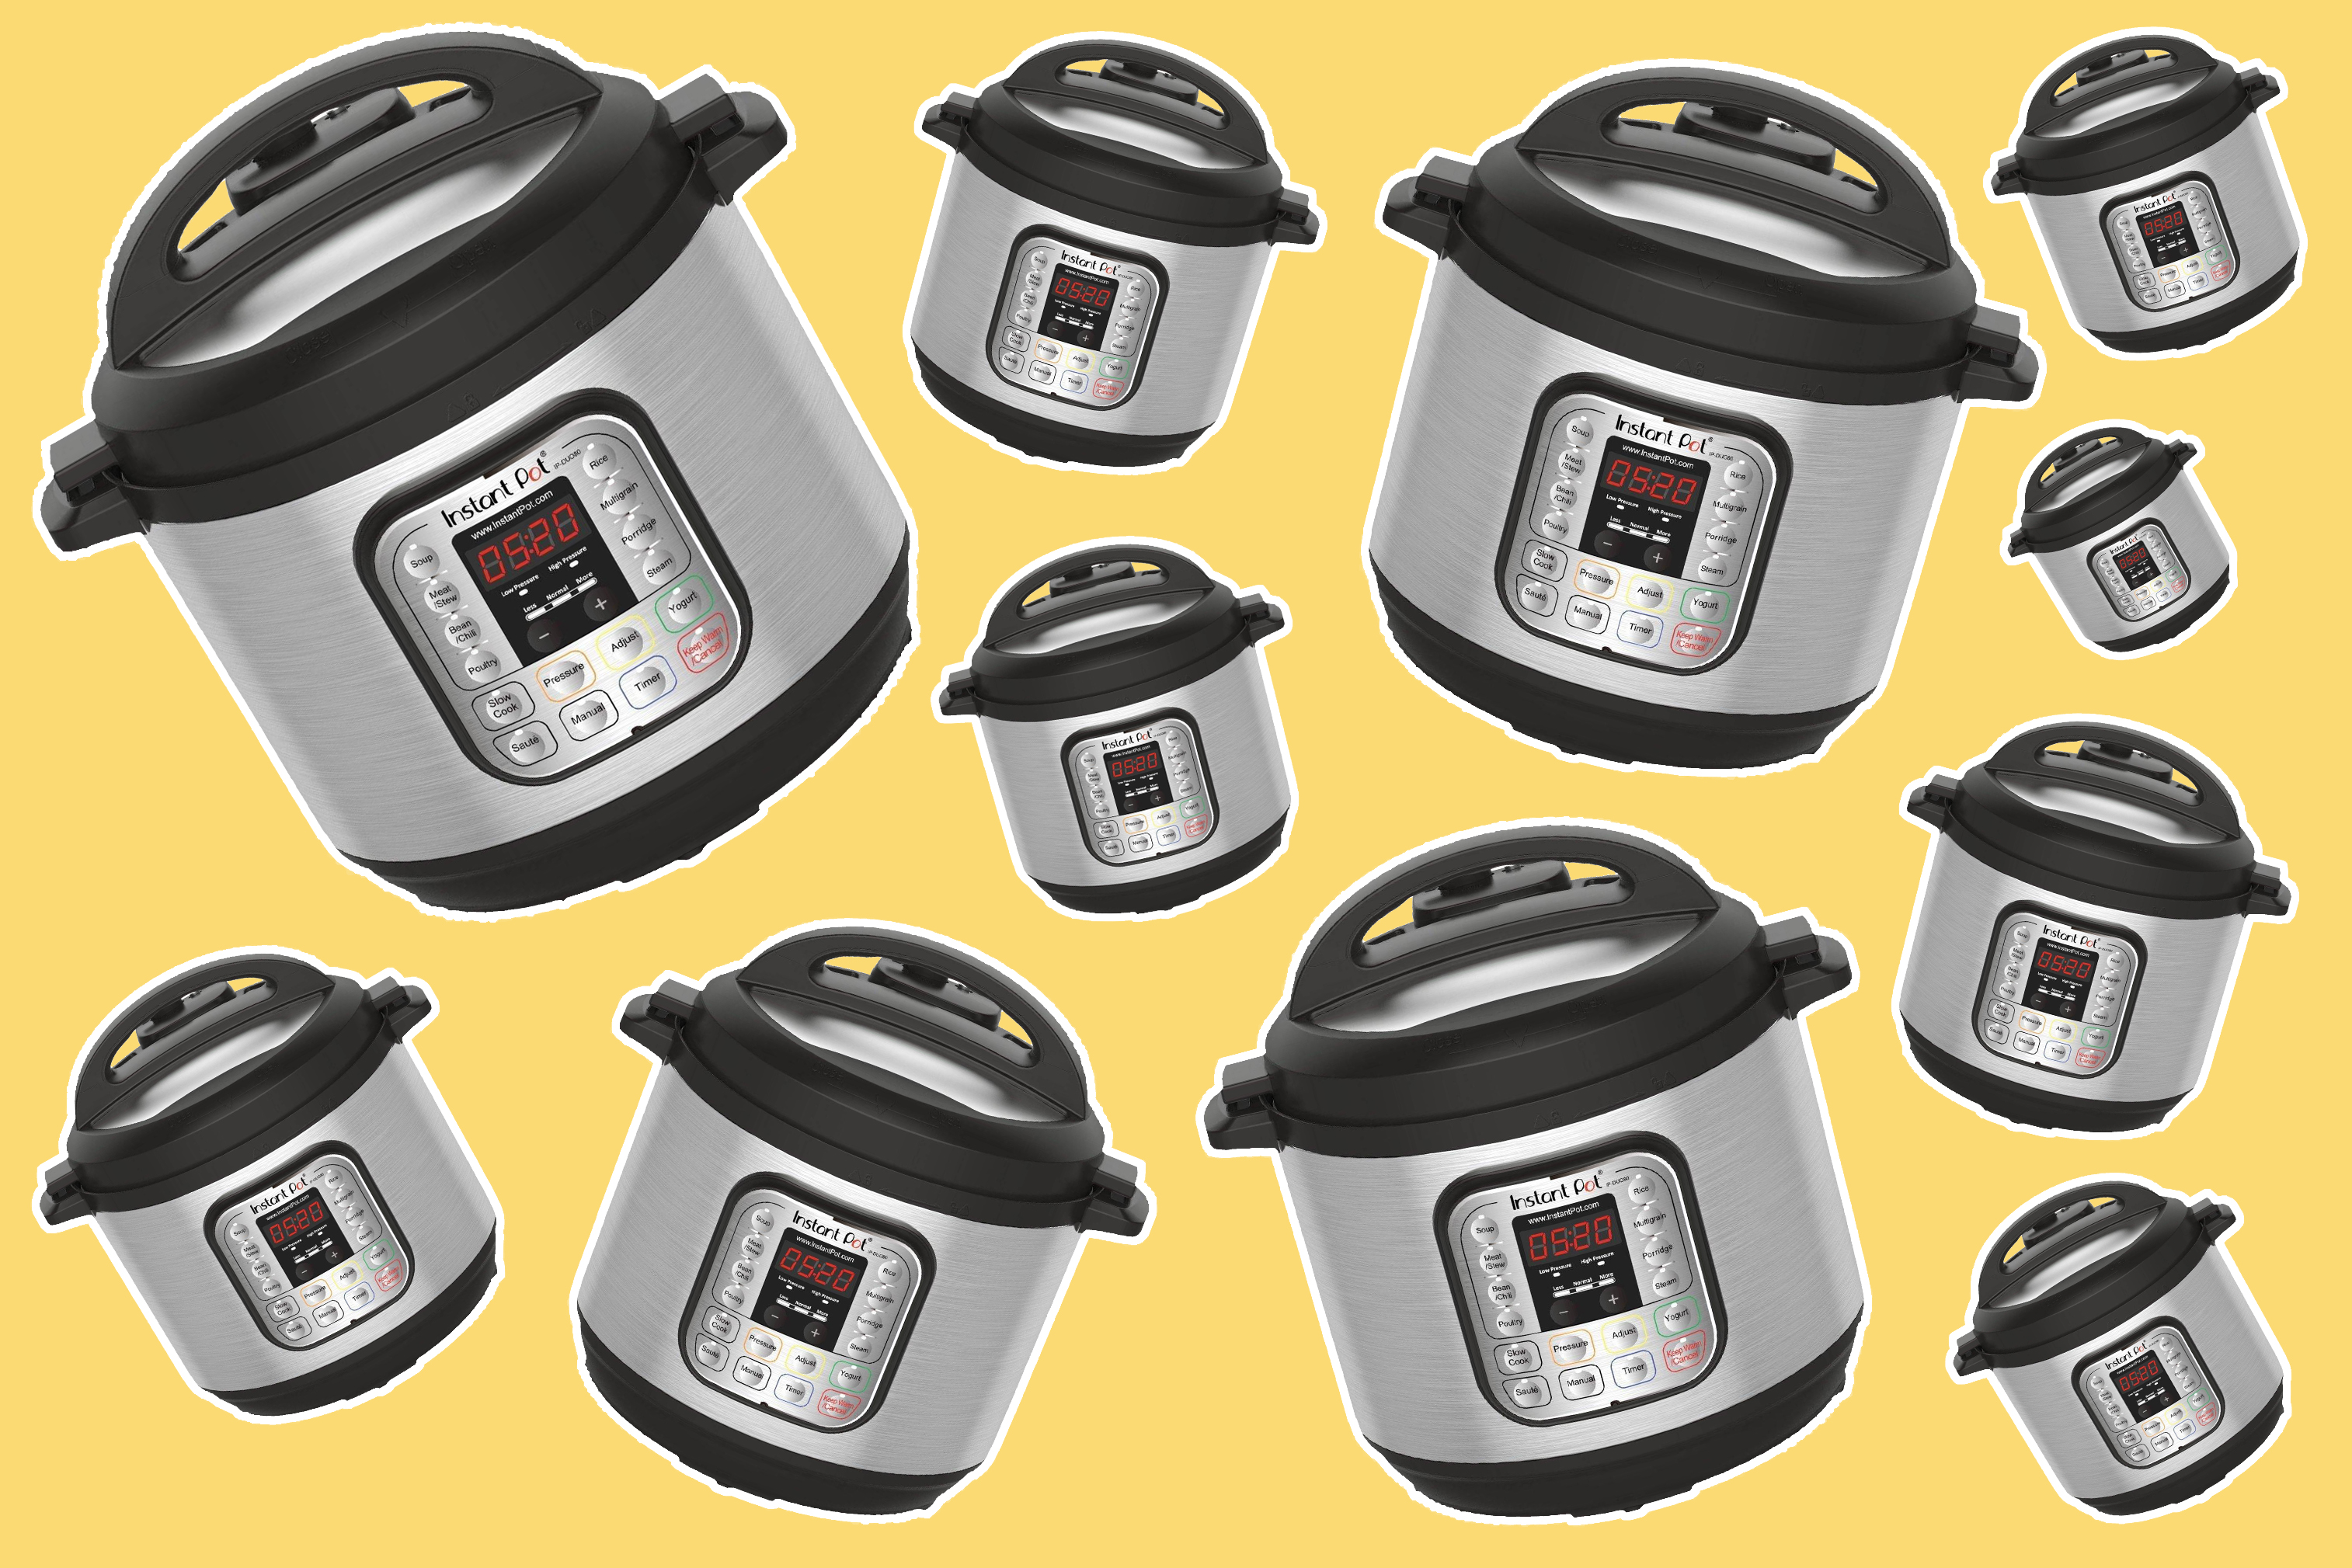 deals: These Instant Pots are on sale up to 30% 